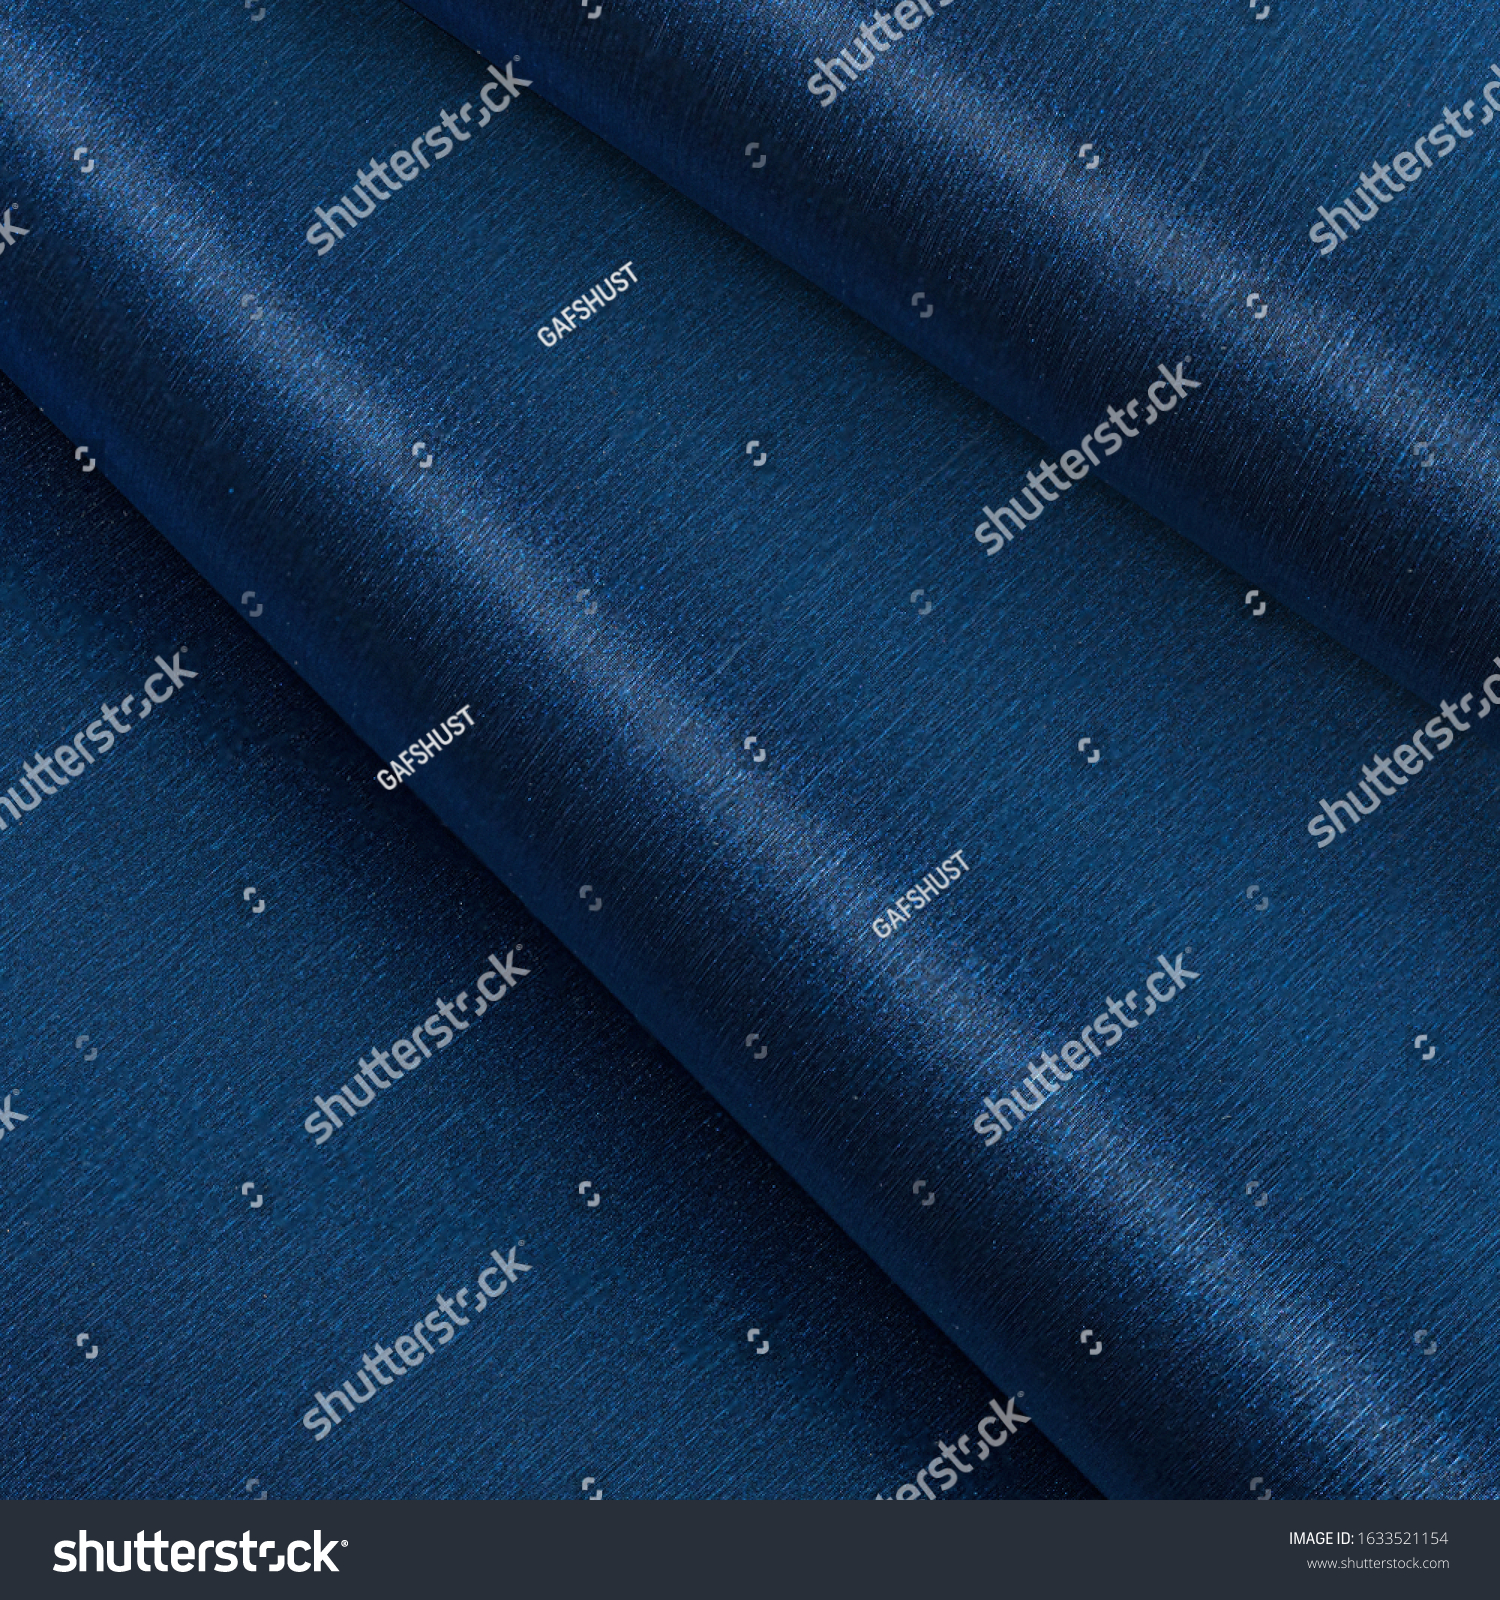 leatherette folds creased folds texture blue shiny flickering wave.
High resolution photo. #1633521154